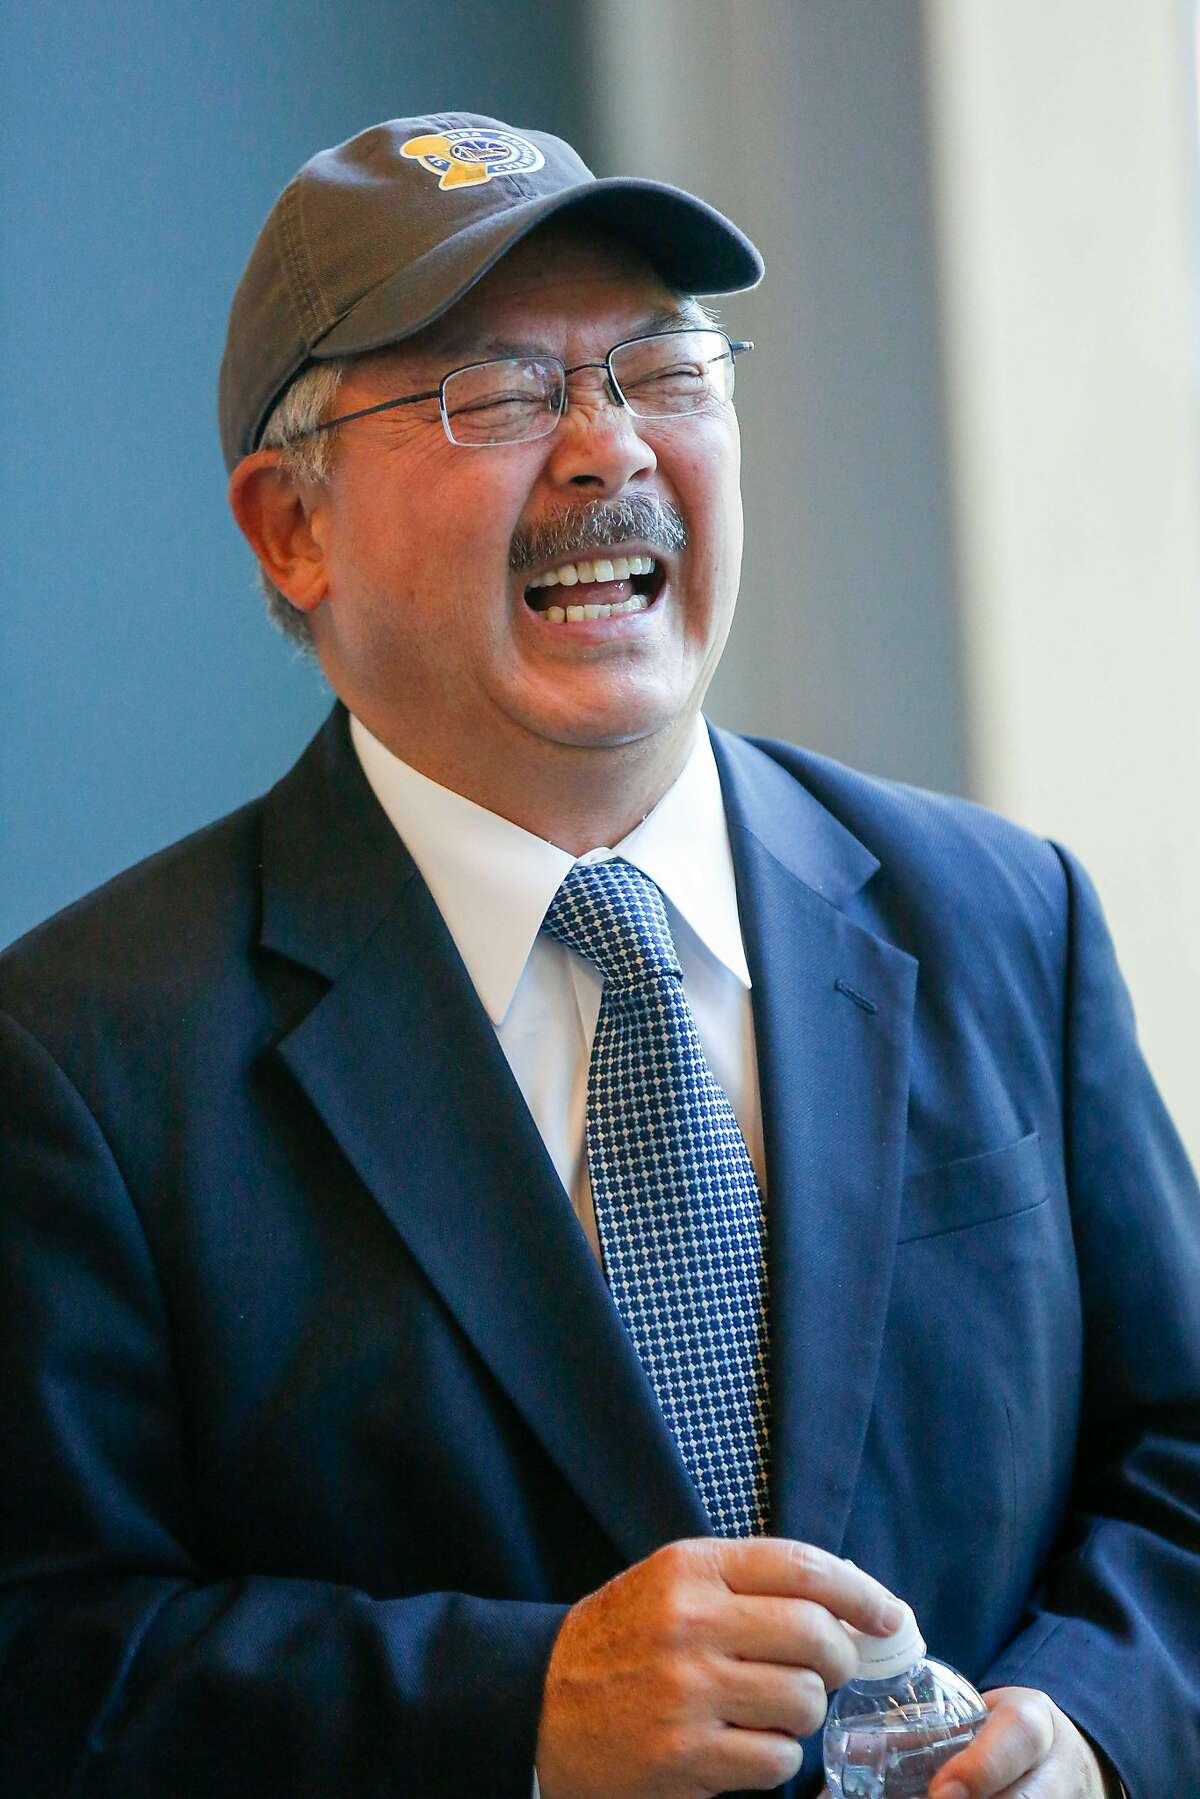 Mayor Ed Lee has a laugh with Warriors officials before a sneak peak tour of the Warriors construction site on Wednesday, November 7, 2017 in San Francisco, Calif.